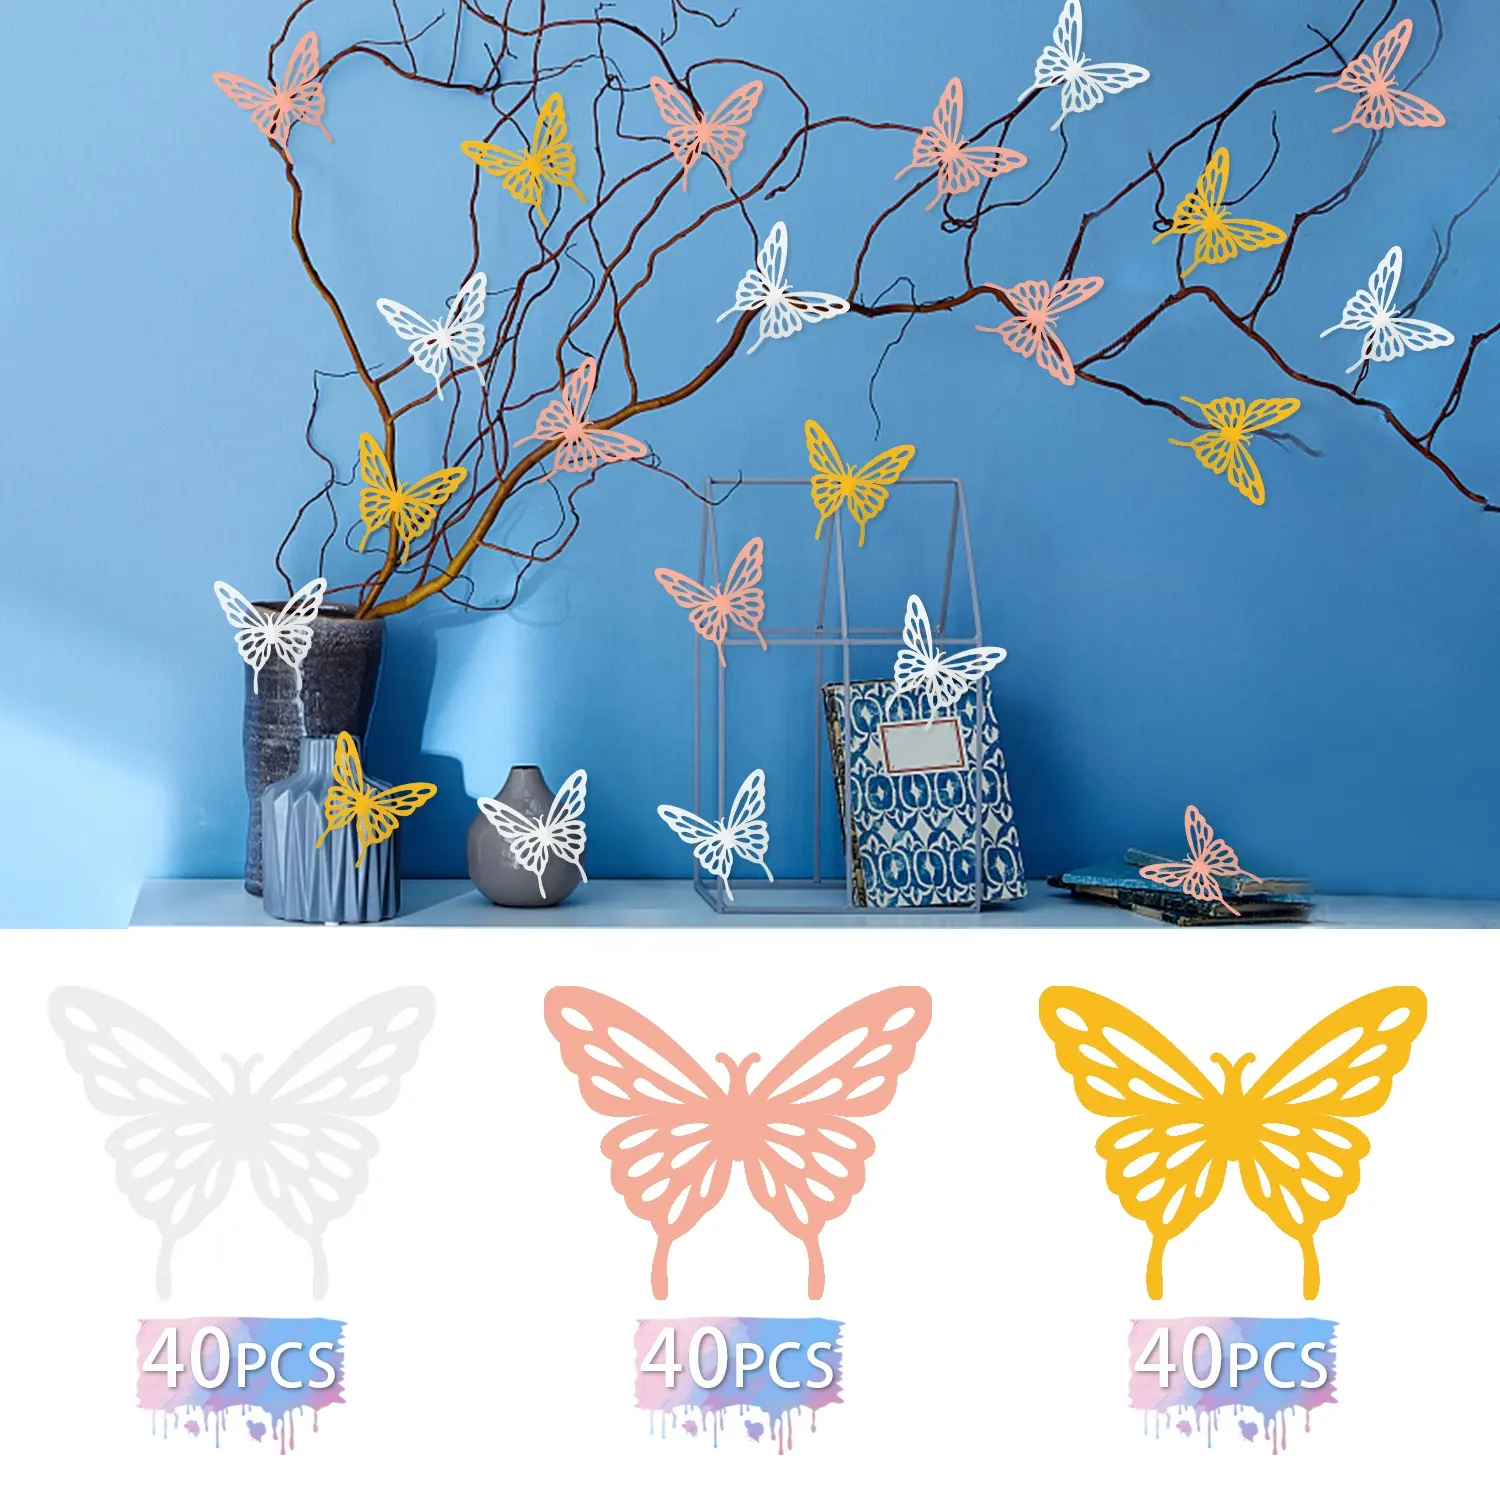 Hot Sale 3D Butterfly Wall Decor 3 Color Wall Sticker Room Mural Decals For Kids Bedroom Nursery Classroom Party Decoration DIY